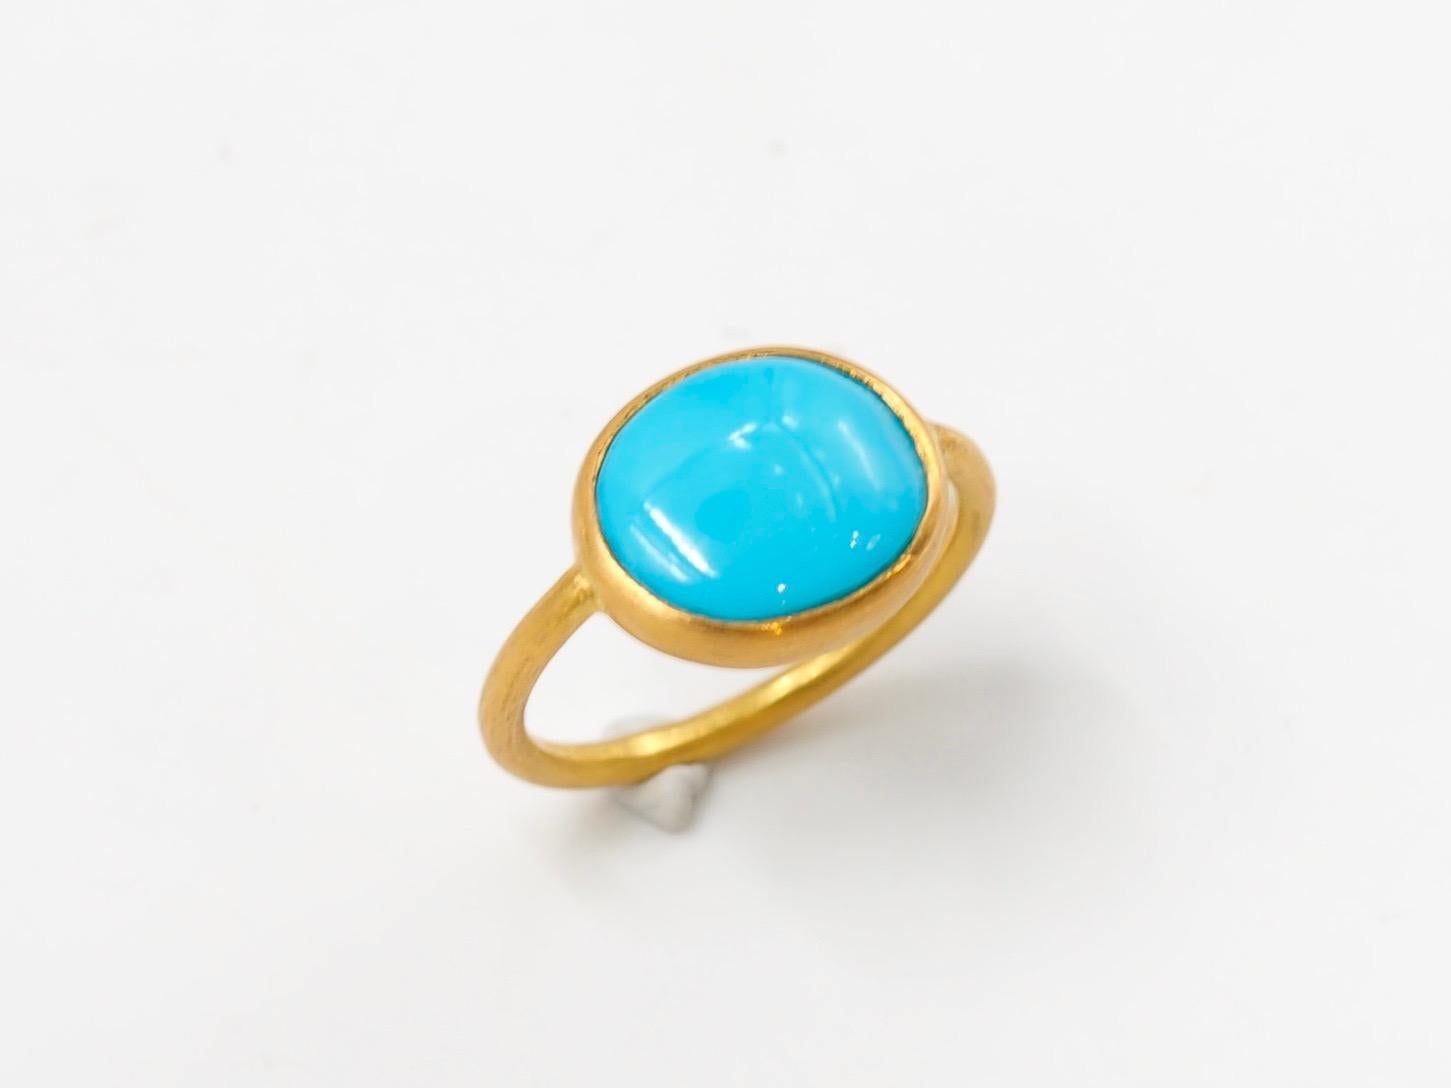 This simple ring by Scrives is composed of a large turquoise cabochon of 3.65 cts. 
The stone is set in a 22kt closed gold setting.
This turquoise is natural with a vibrant and strong colour. It has natural & typical small inclusions. The stone